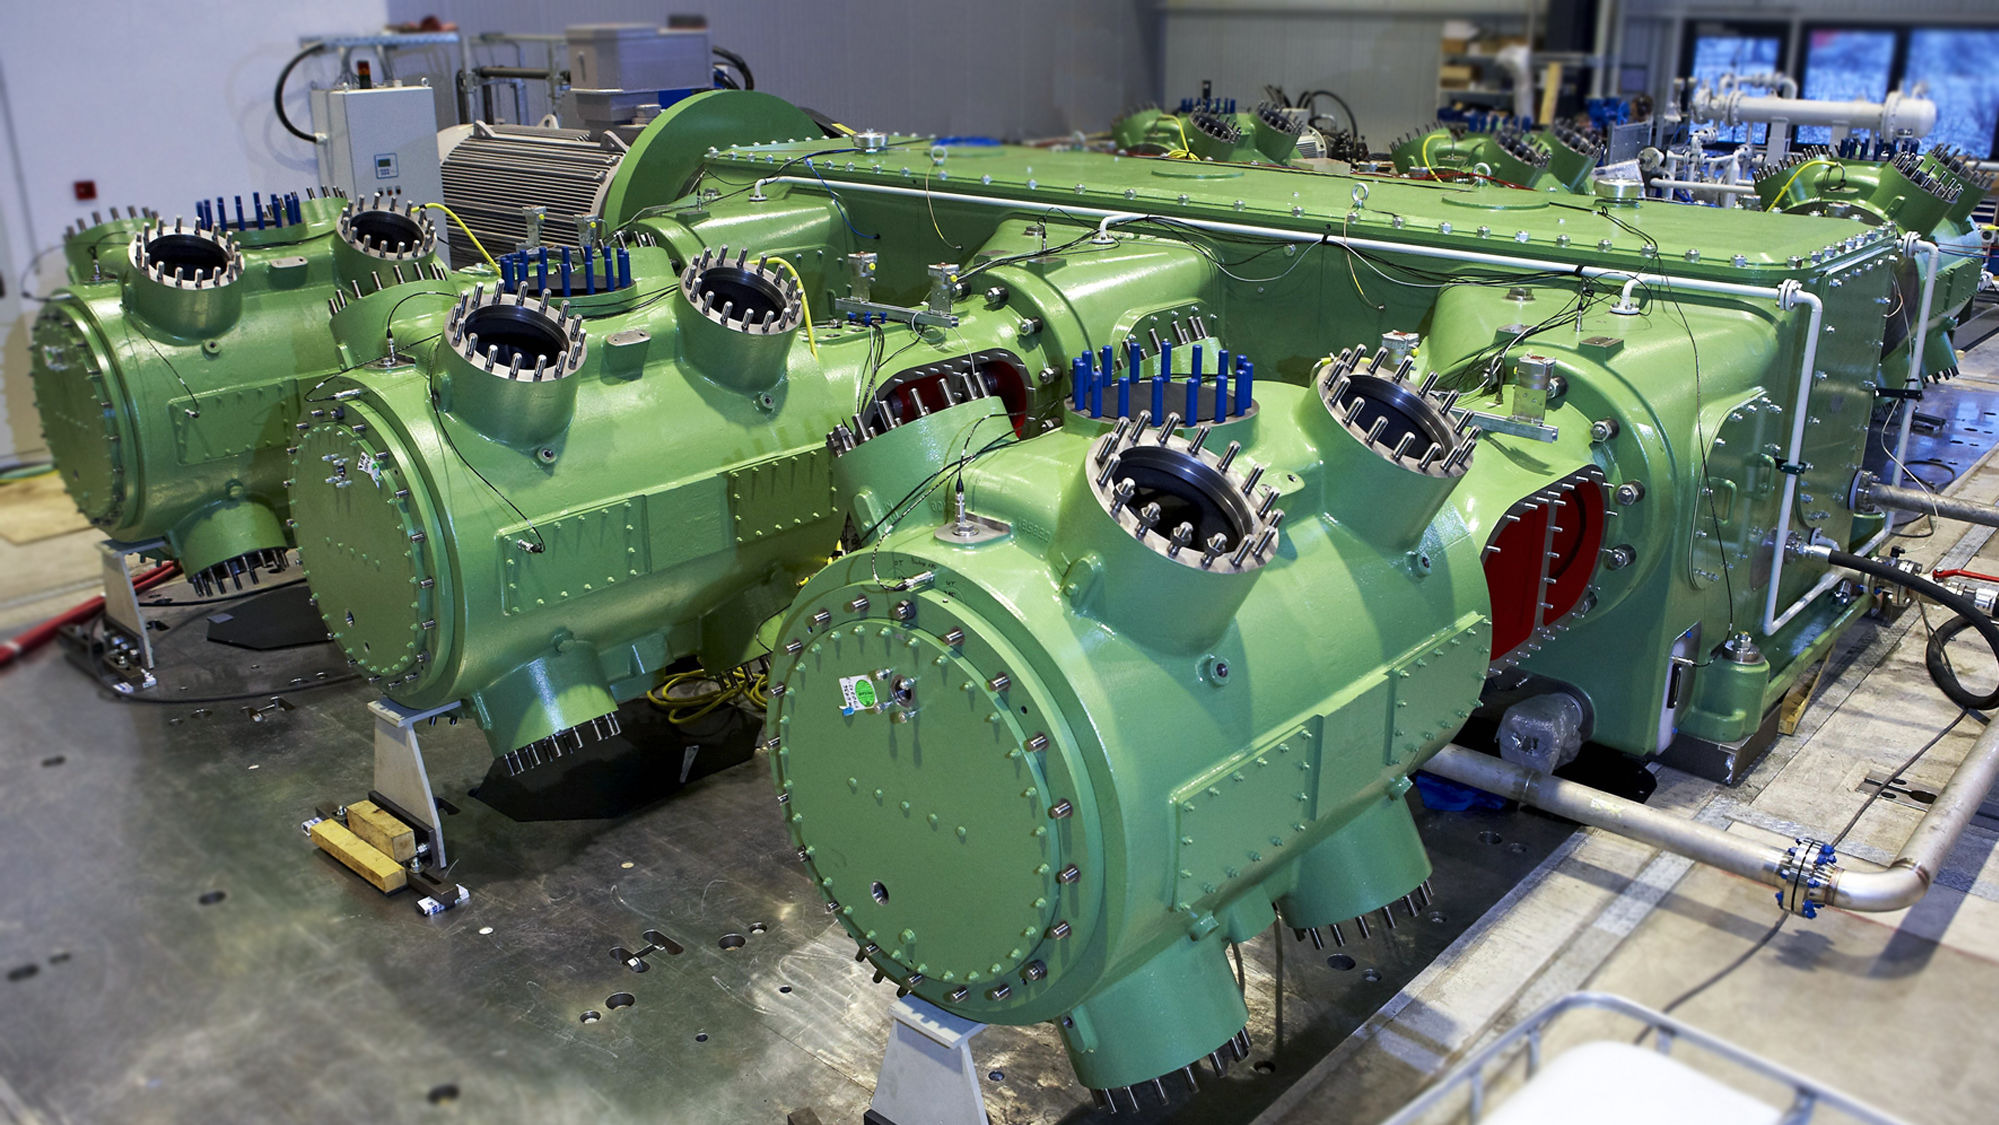 A green 6-crank reciprocating compressor of boxer design can be seen on the test field.